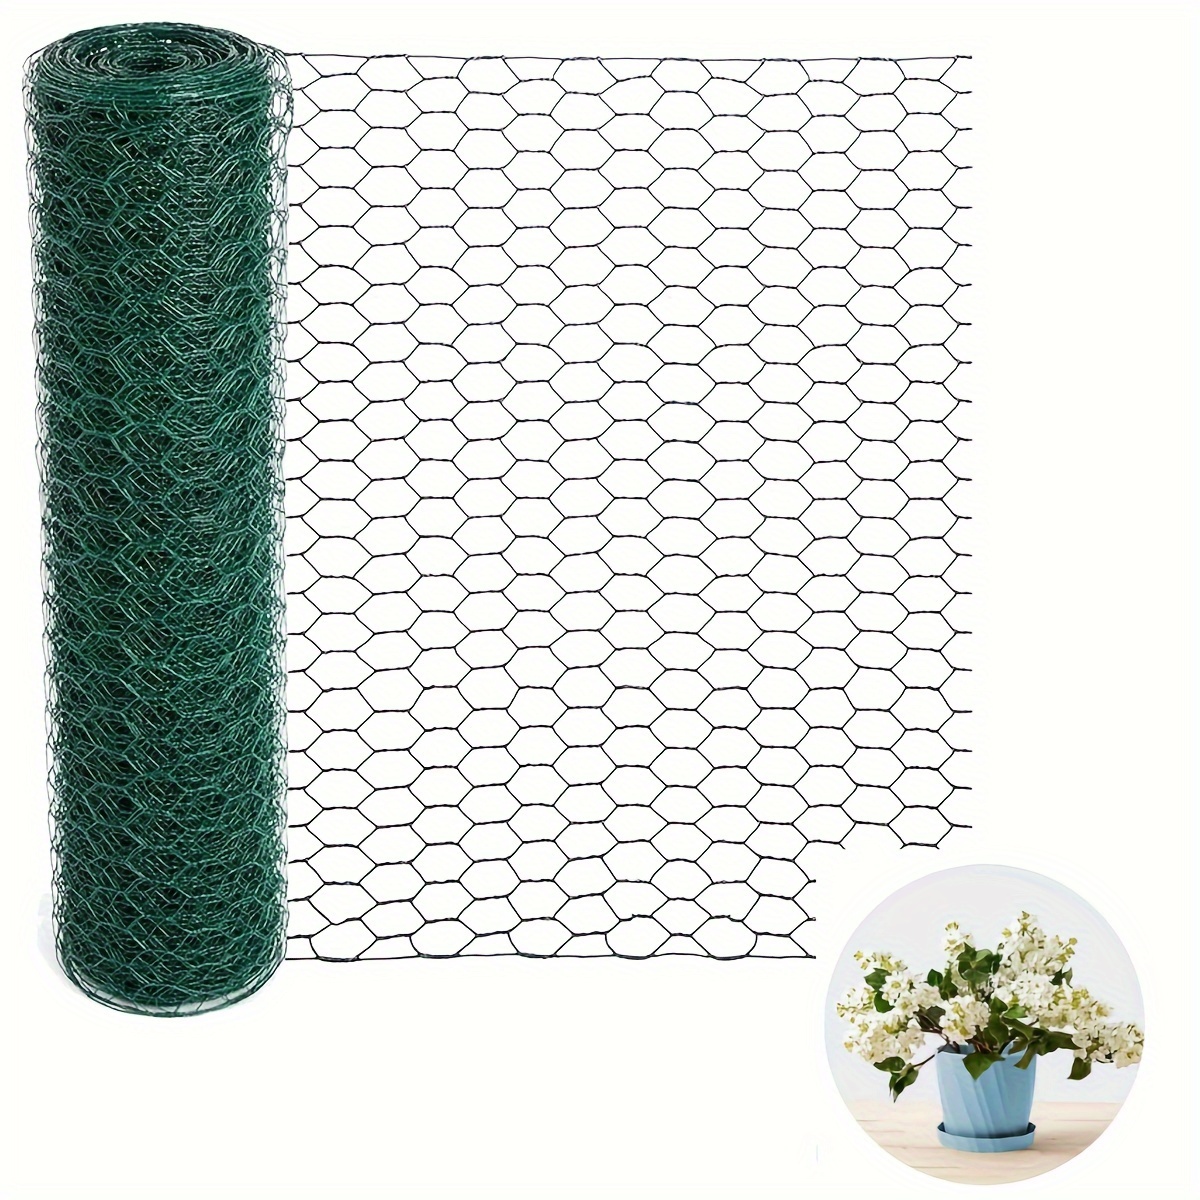 

Iron Chicken Wire Mesh Roll For Plant Protection And Diy Floral Crafts - Multi-purpose Fencing Net For Home And Garden Decoration, Easy Cut Flower Support Grid